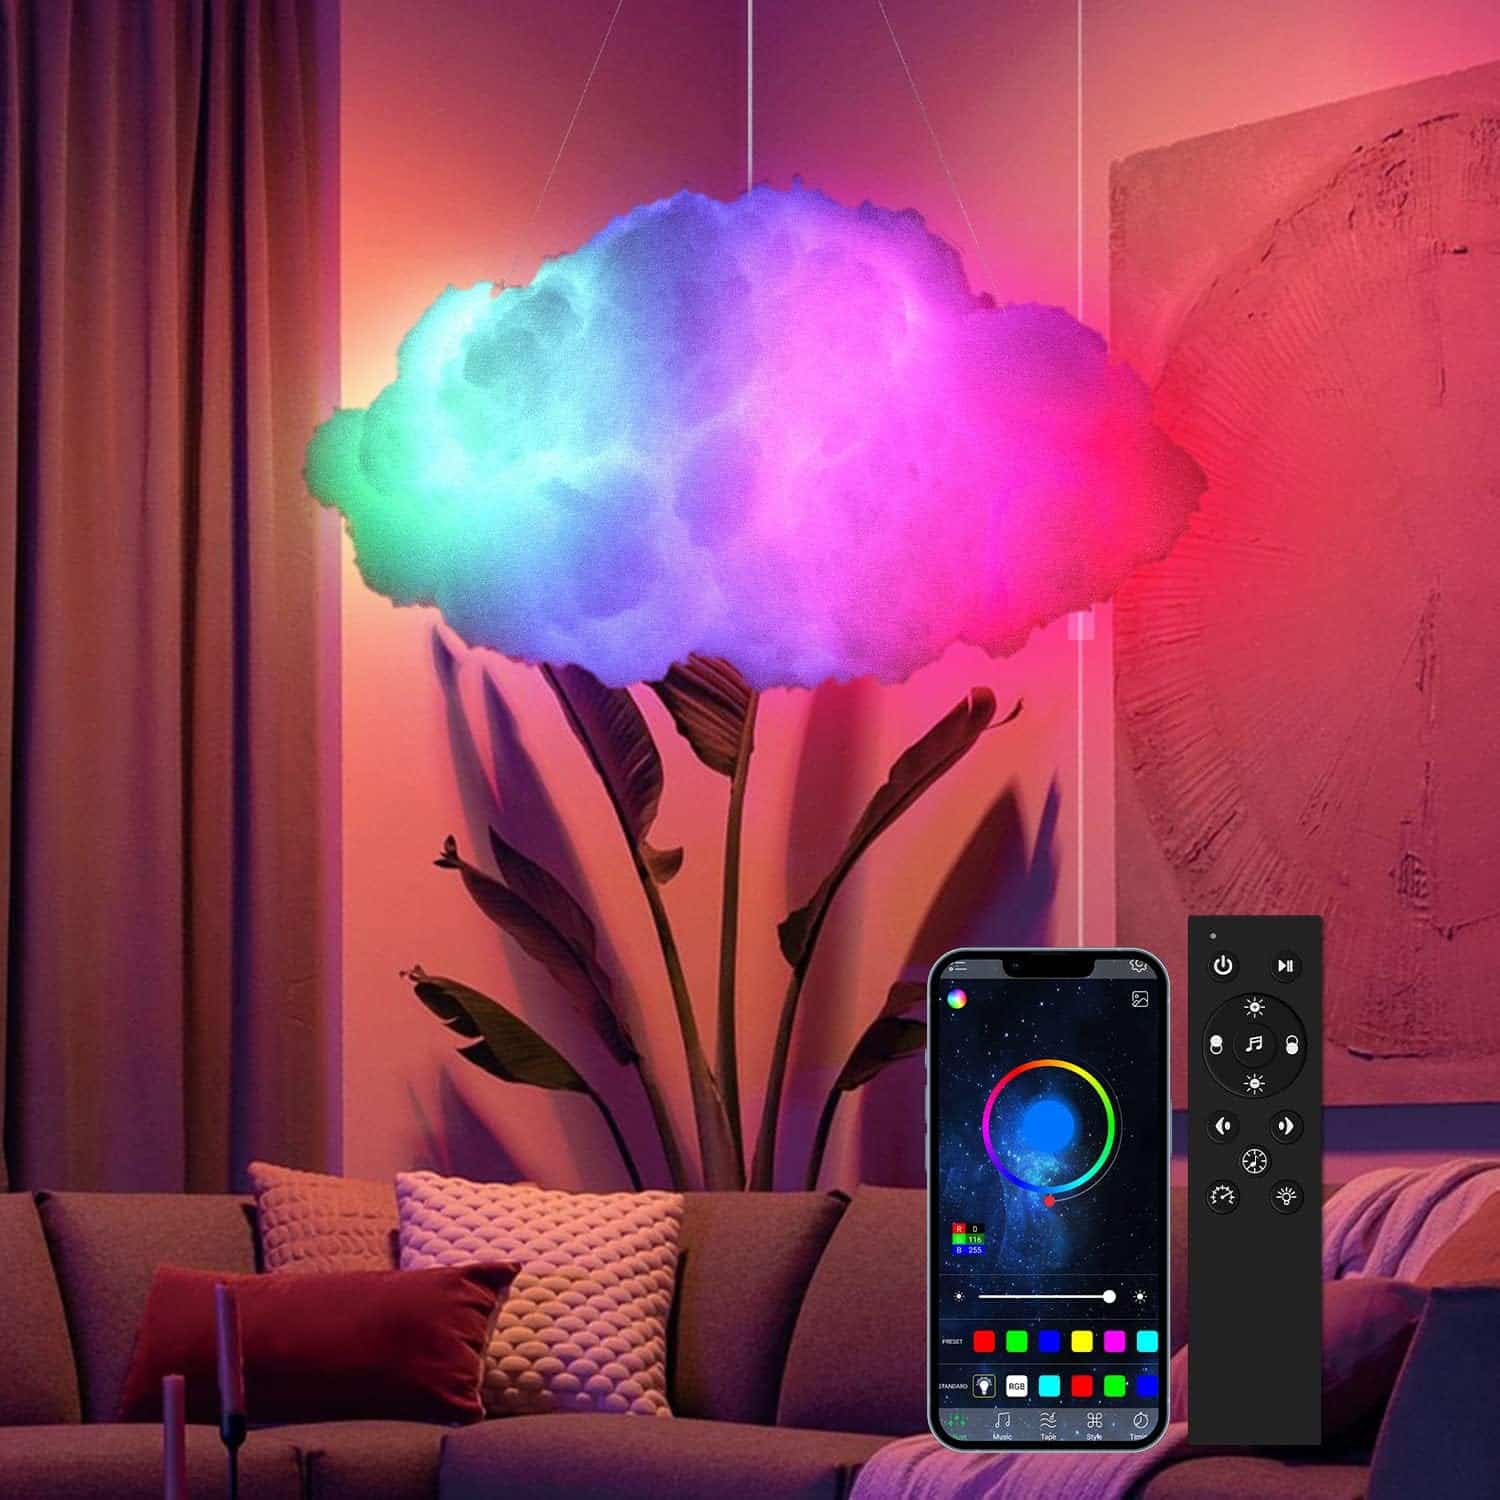 TACAHE RGB Color Changing Ceiling Cloud Light - 256 Patterns, Solid Colors, Music Sync - DIY Shaped Cloud Lamp with Remote  APP Control - Unique Decorations Ambient Lighting - 12V LED - 12W